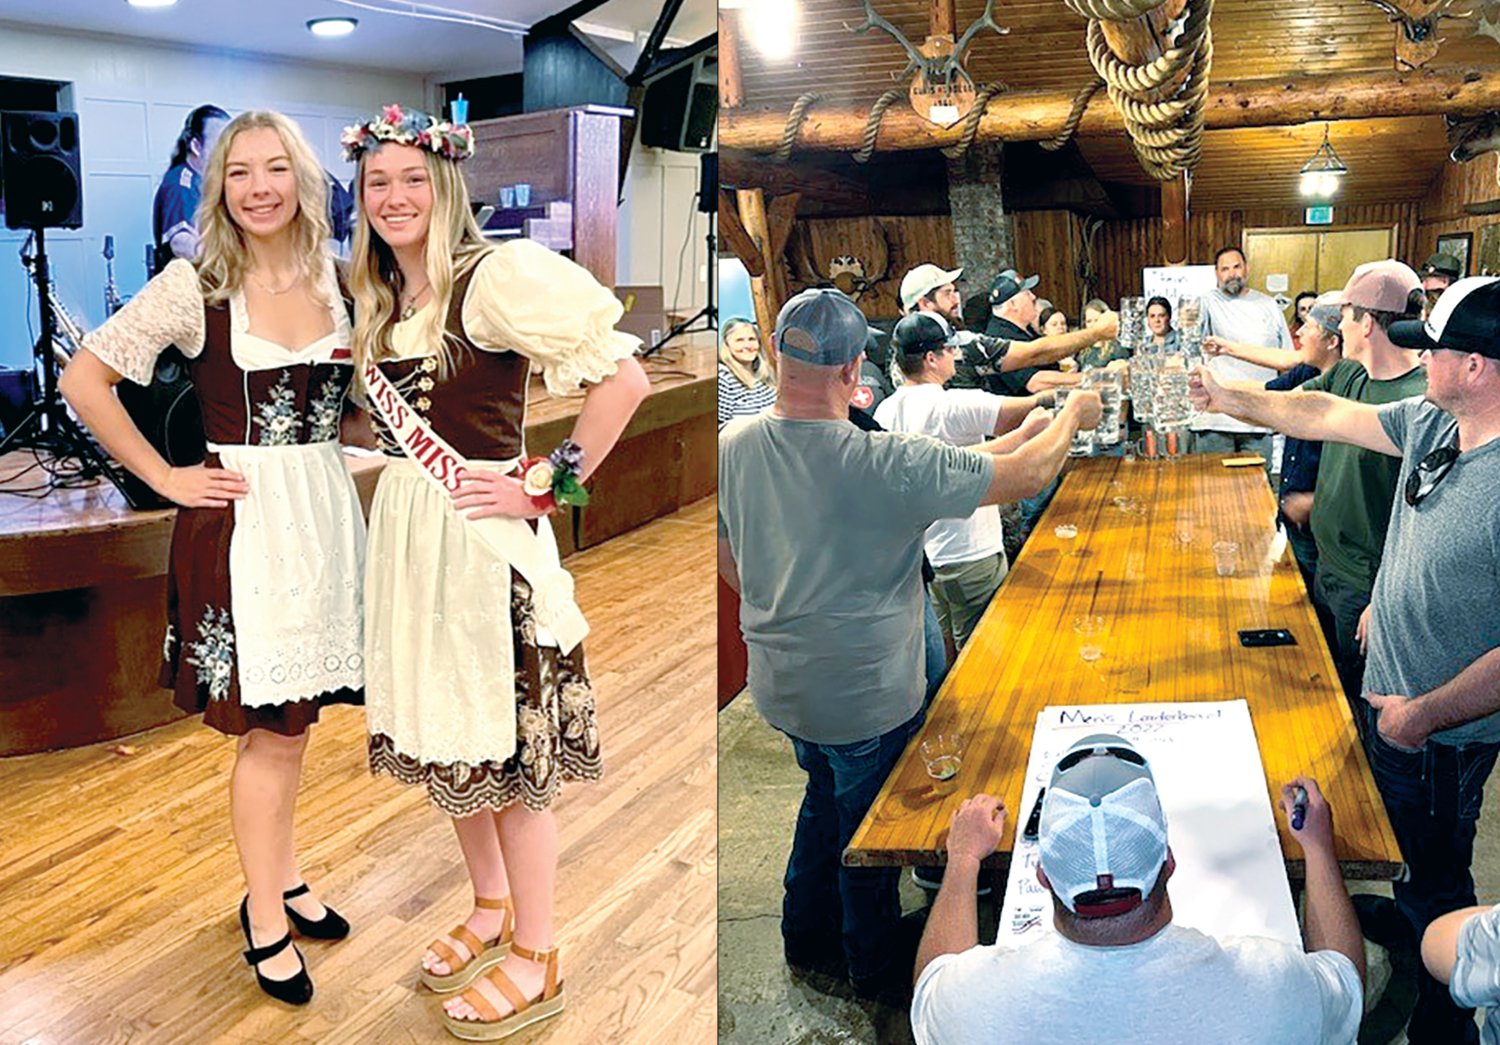 (Left): 2021 Swiss Miss Alli Engel, left, and the new Swiss Miss Grace Huber are pictured at Oktoberfest Oct. 1. (Right): Steinholding competitors hold steins during the competition at Oktoberfest in Frances on Oct. 1